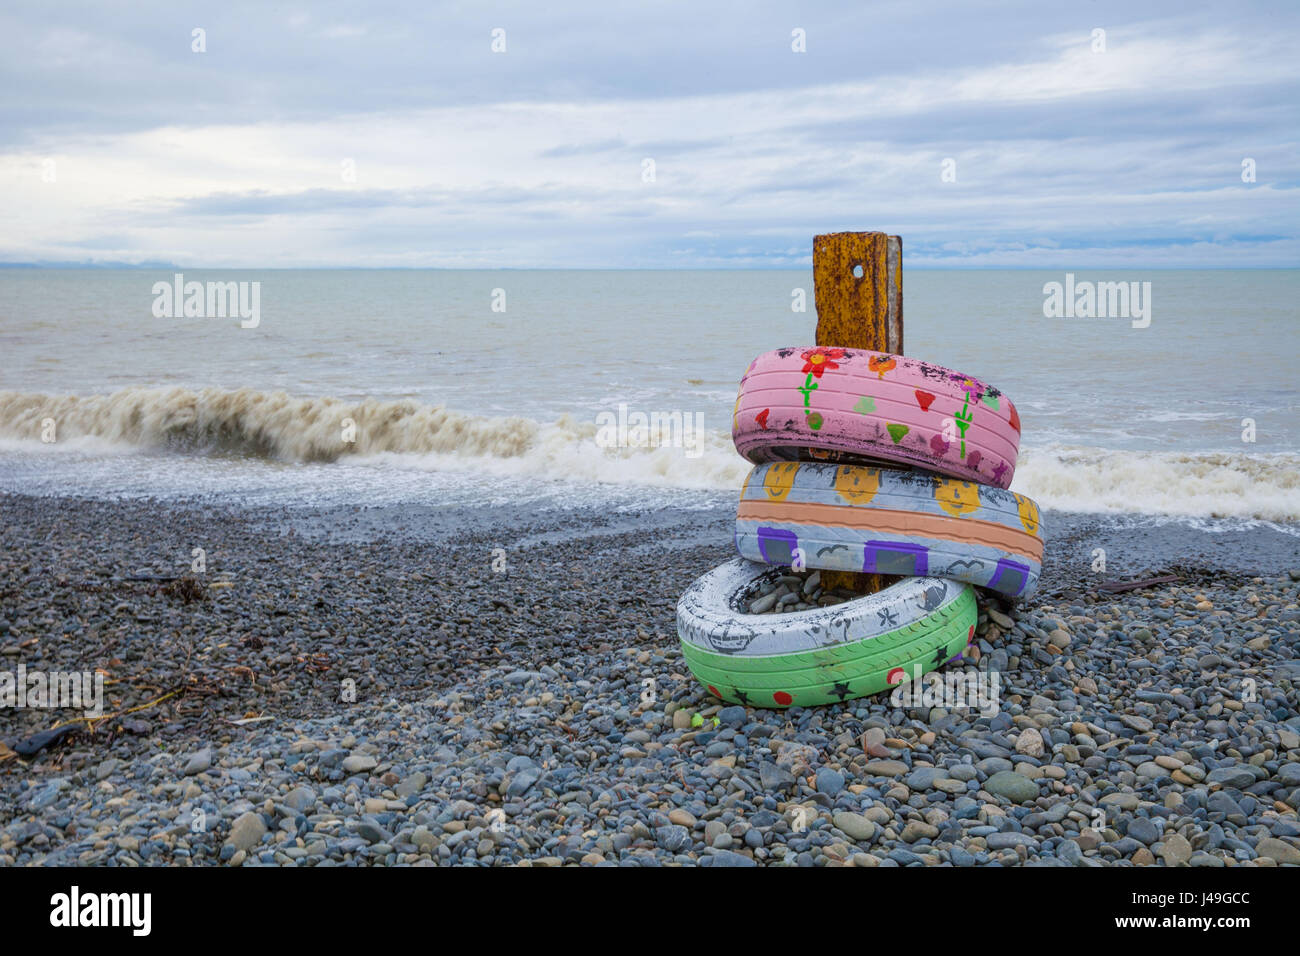 Decorated tyres on a pebble beach in winter Stock Photo